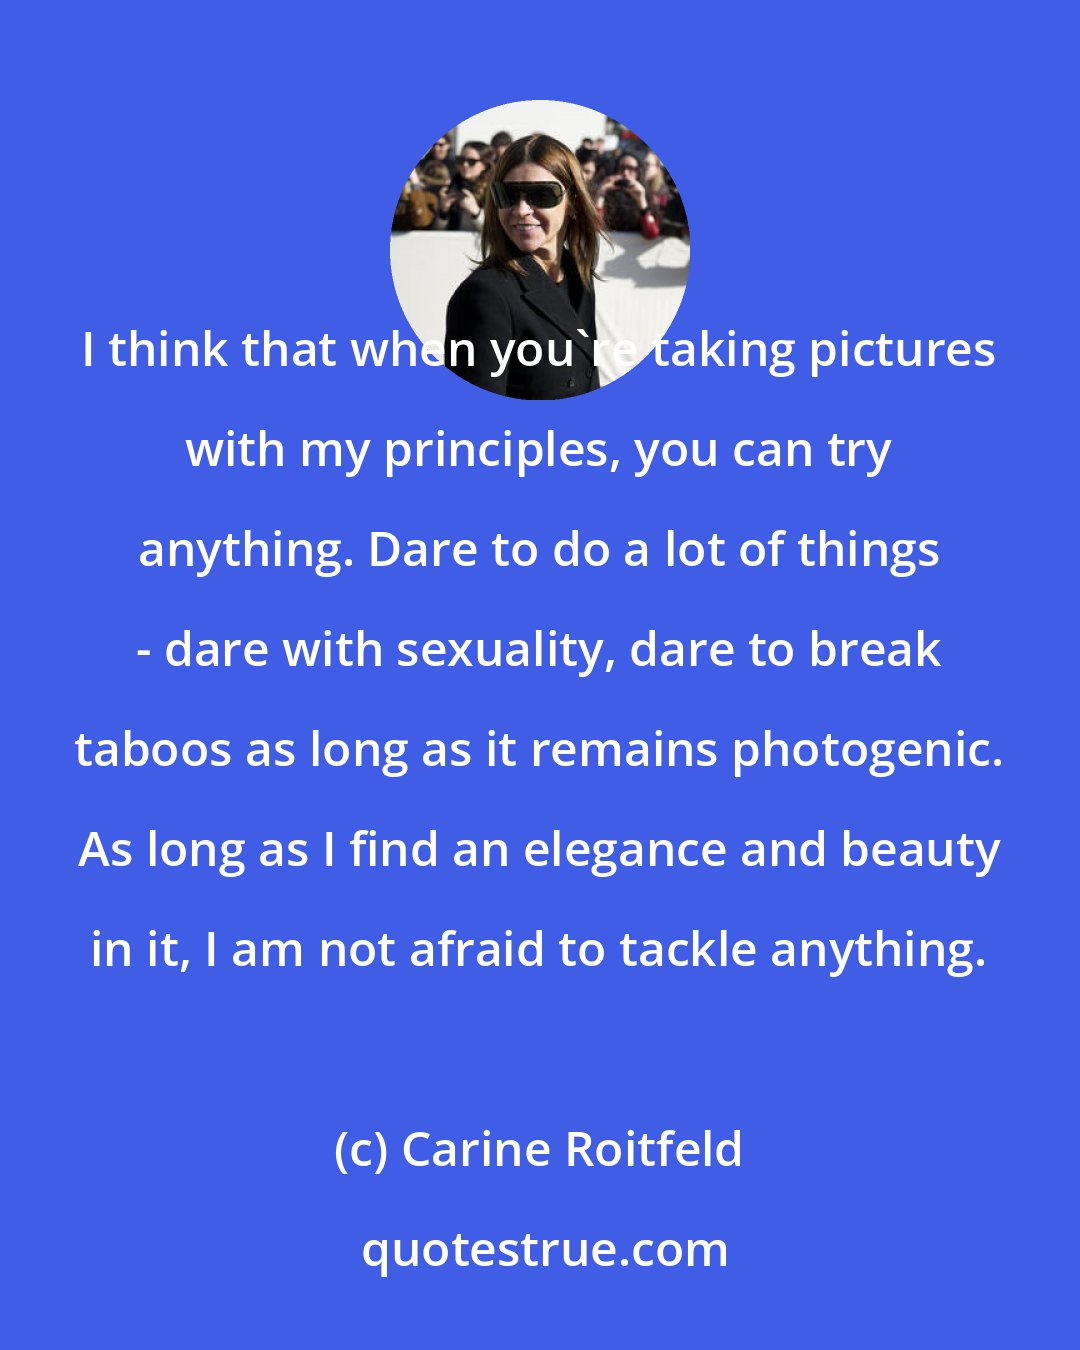 Carine Roitfeld: I think that when you're taking pictures with my principles, you can try anything. Dare to do a lot of things - dare with sexuality, dare to break taboos as long as it remains photogenic. As long as I find an elegance and beauty in it, I am not afraid to tackle anything.